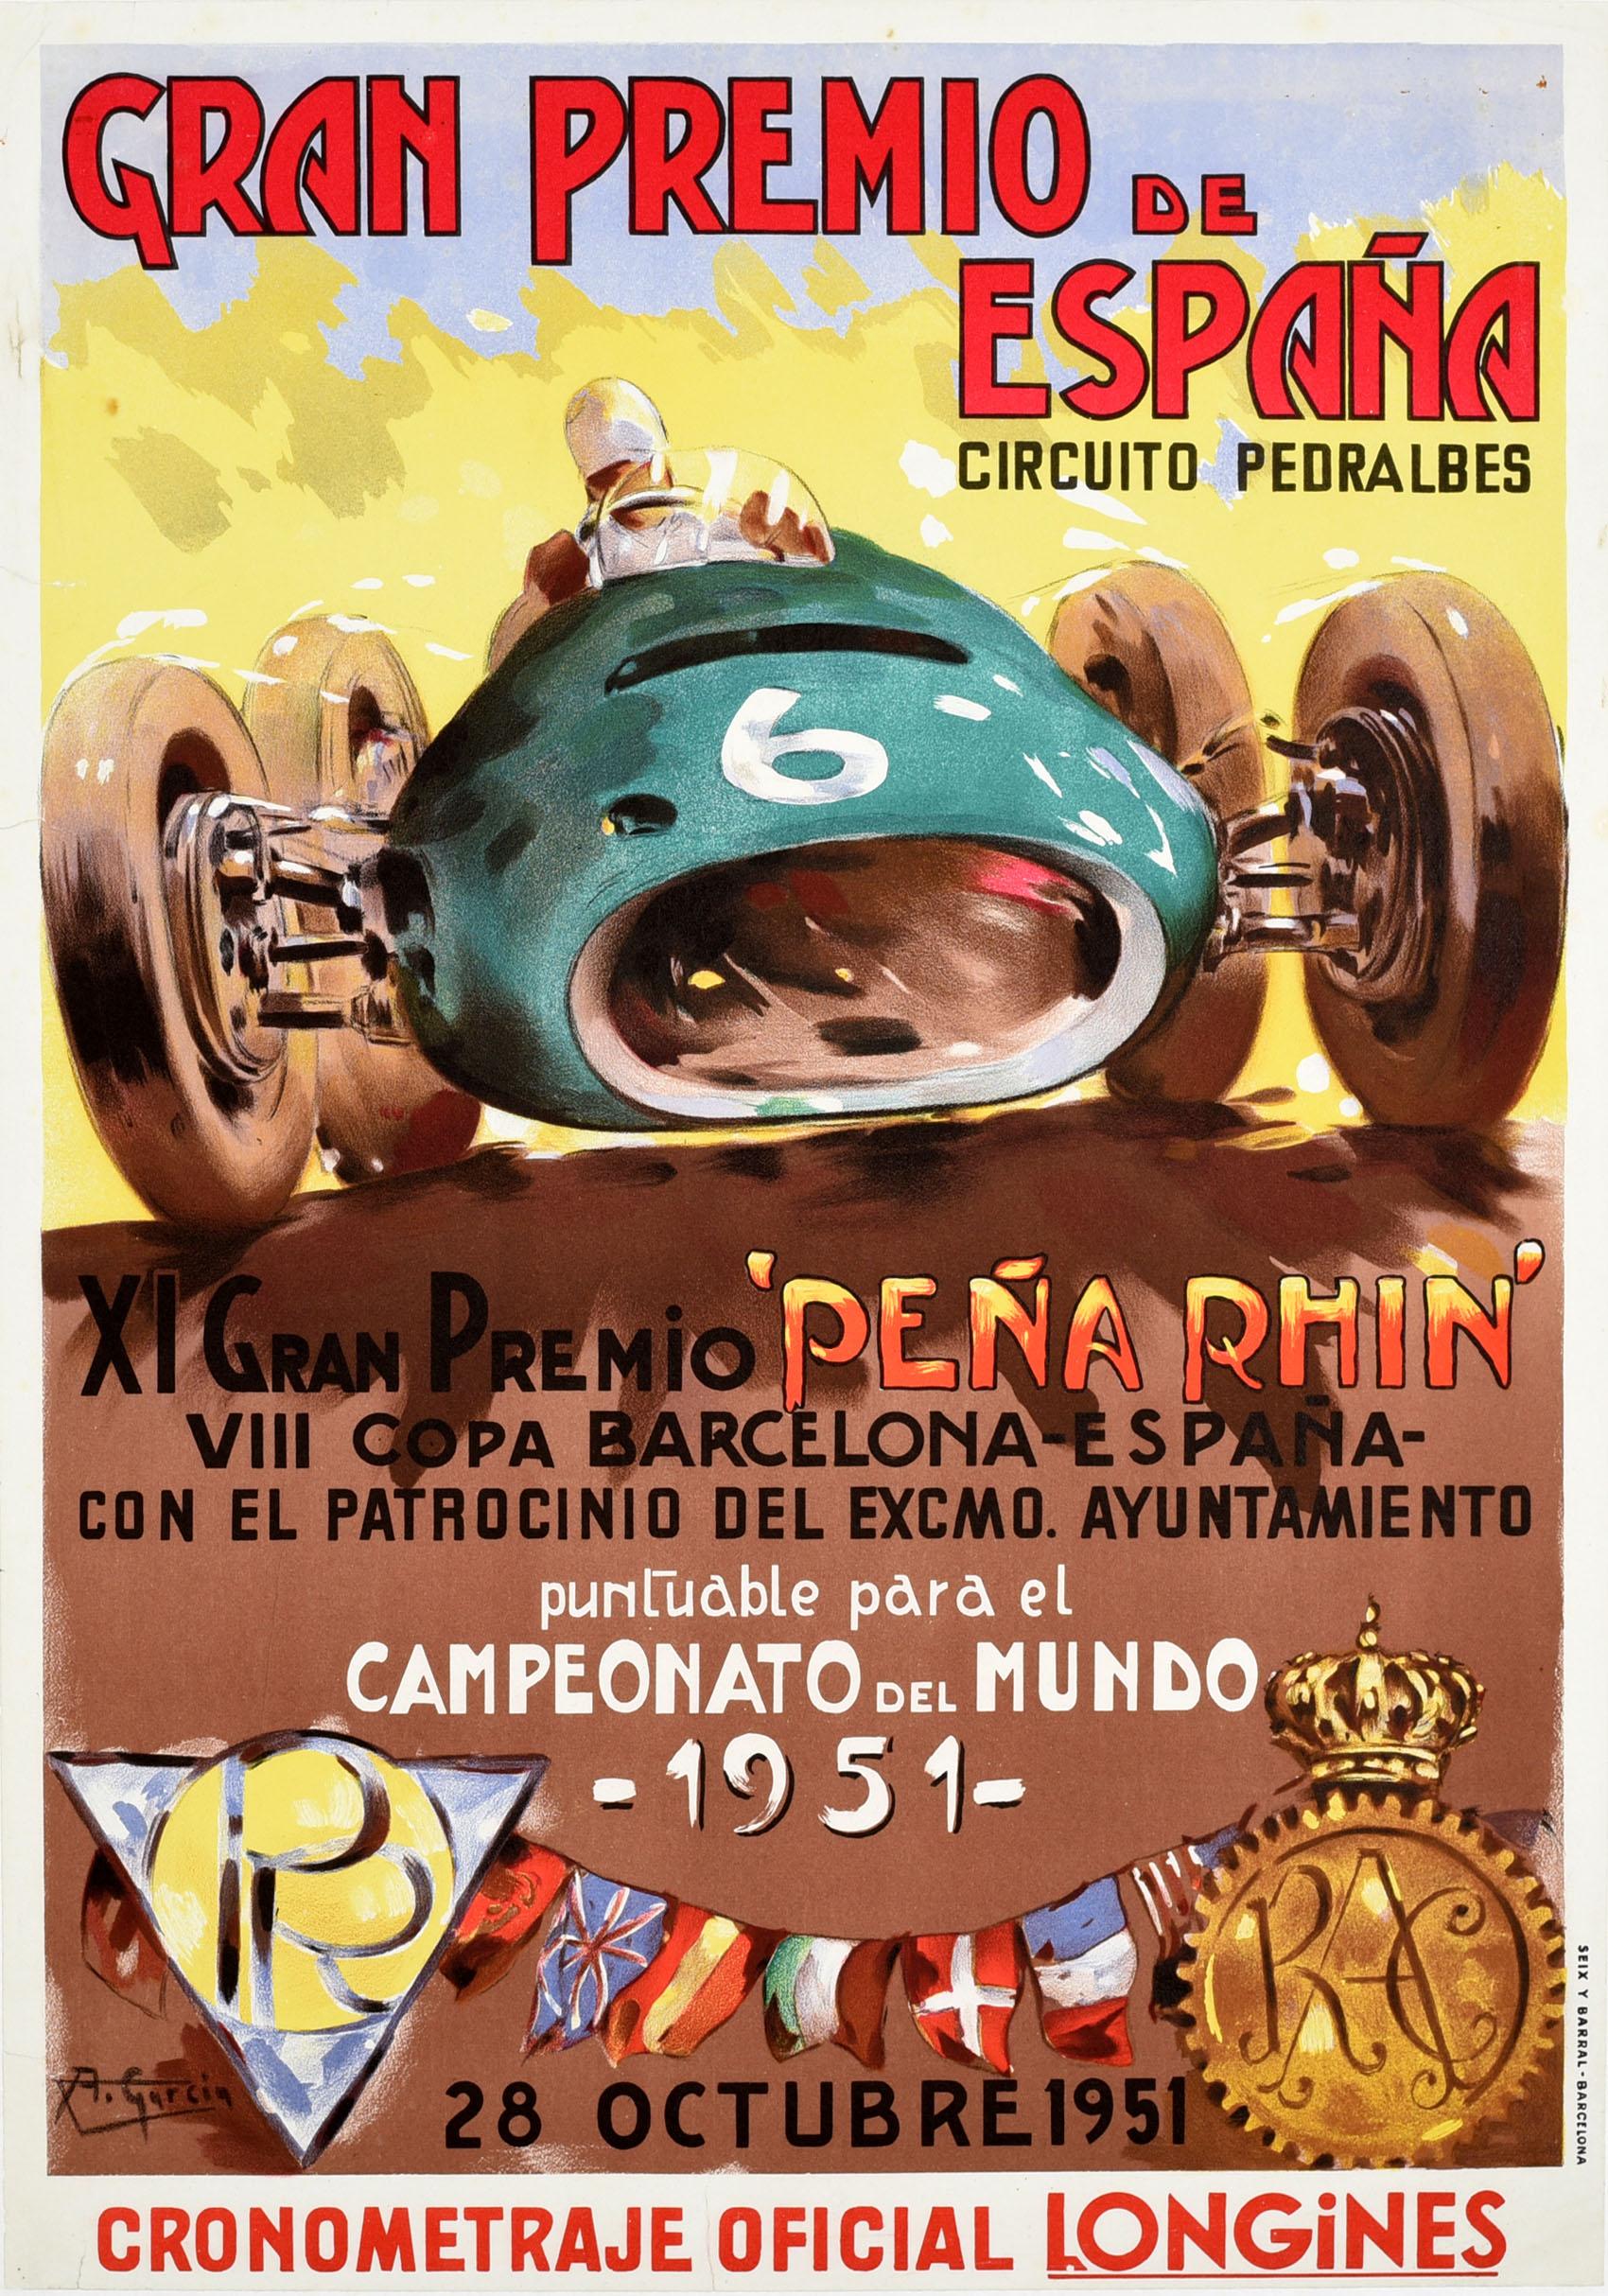 Original vintage Formula One GP motorsport poster for the World Championship Spanish Grand Prix Pedralbes Circuit / Gran Premio De Espana Circuito Pedralbes on 28 October 1951 featuring a colourful and dynamic F1 auto racing design of a classic car